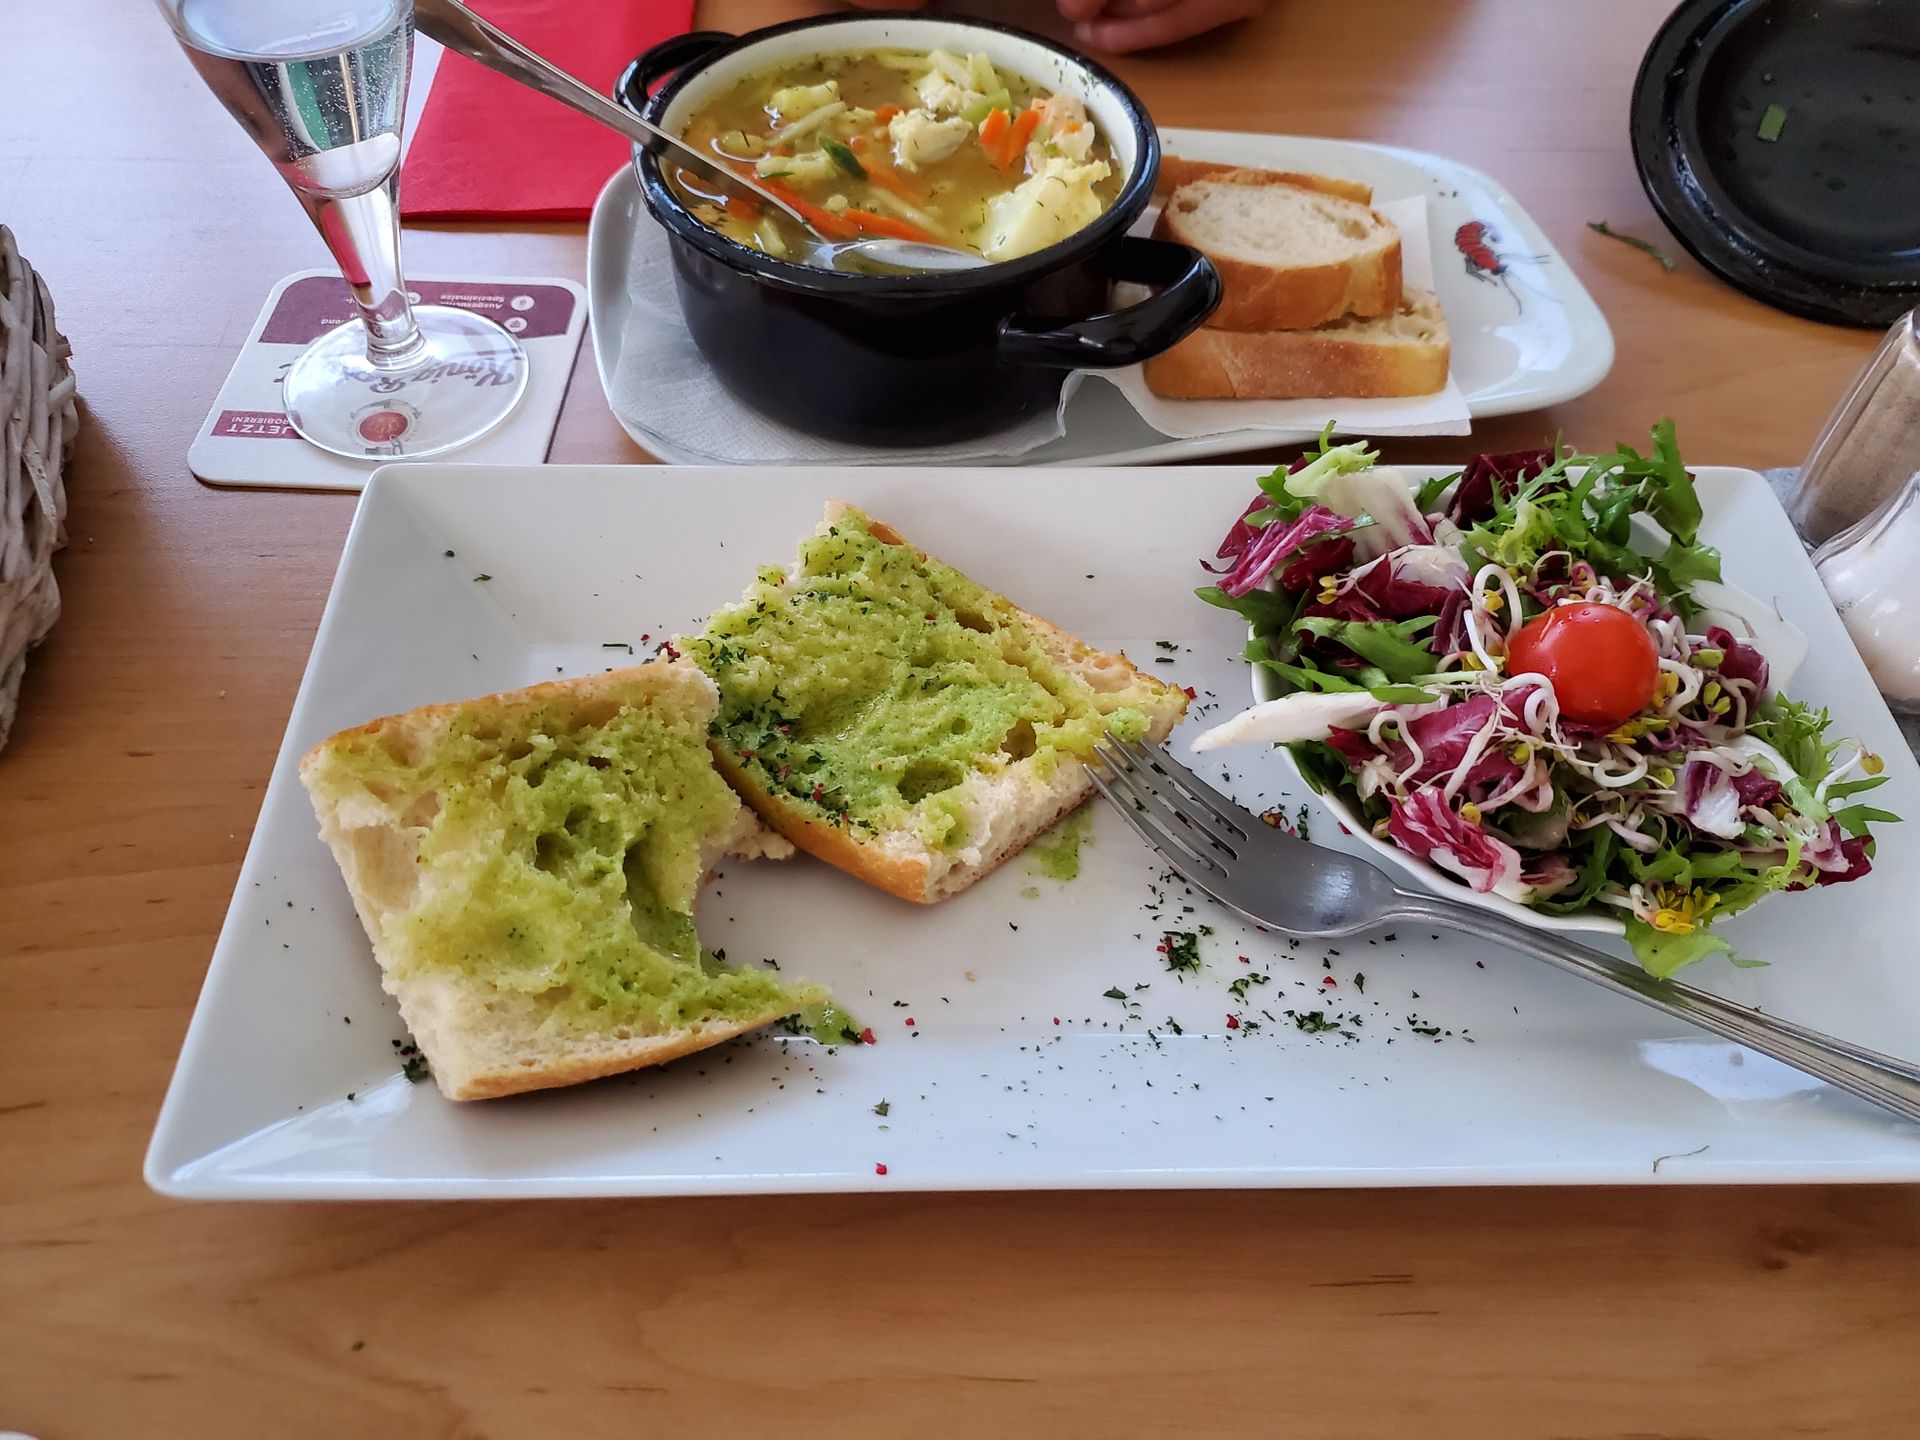 Starter: Crab soup was sold out. So fish soup and salad with herb baguette.